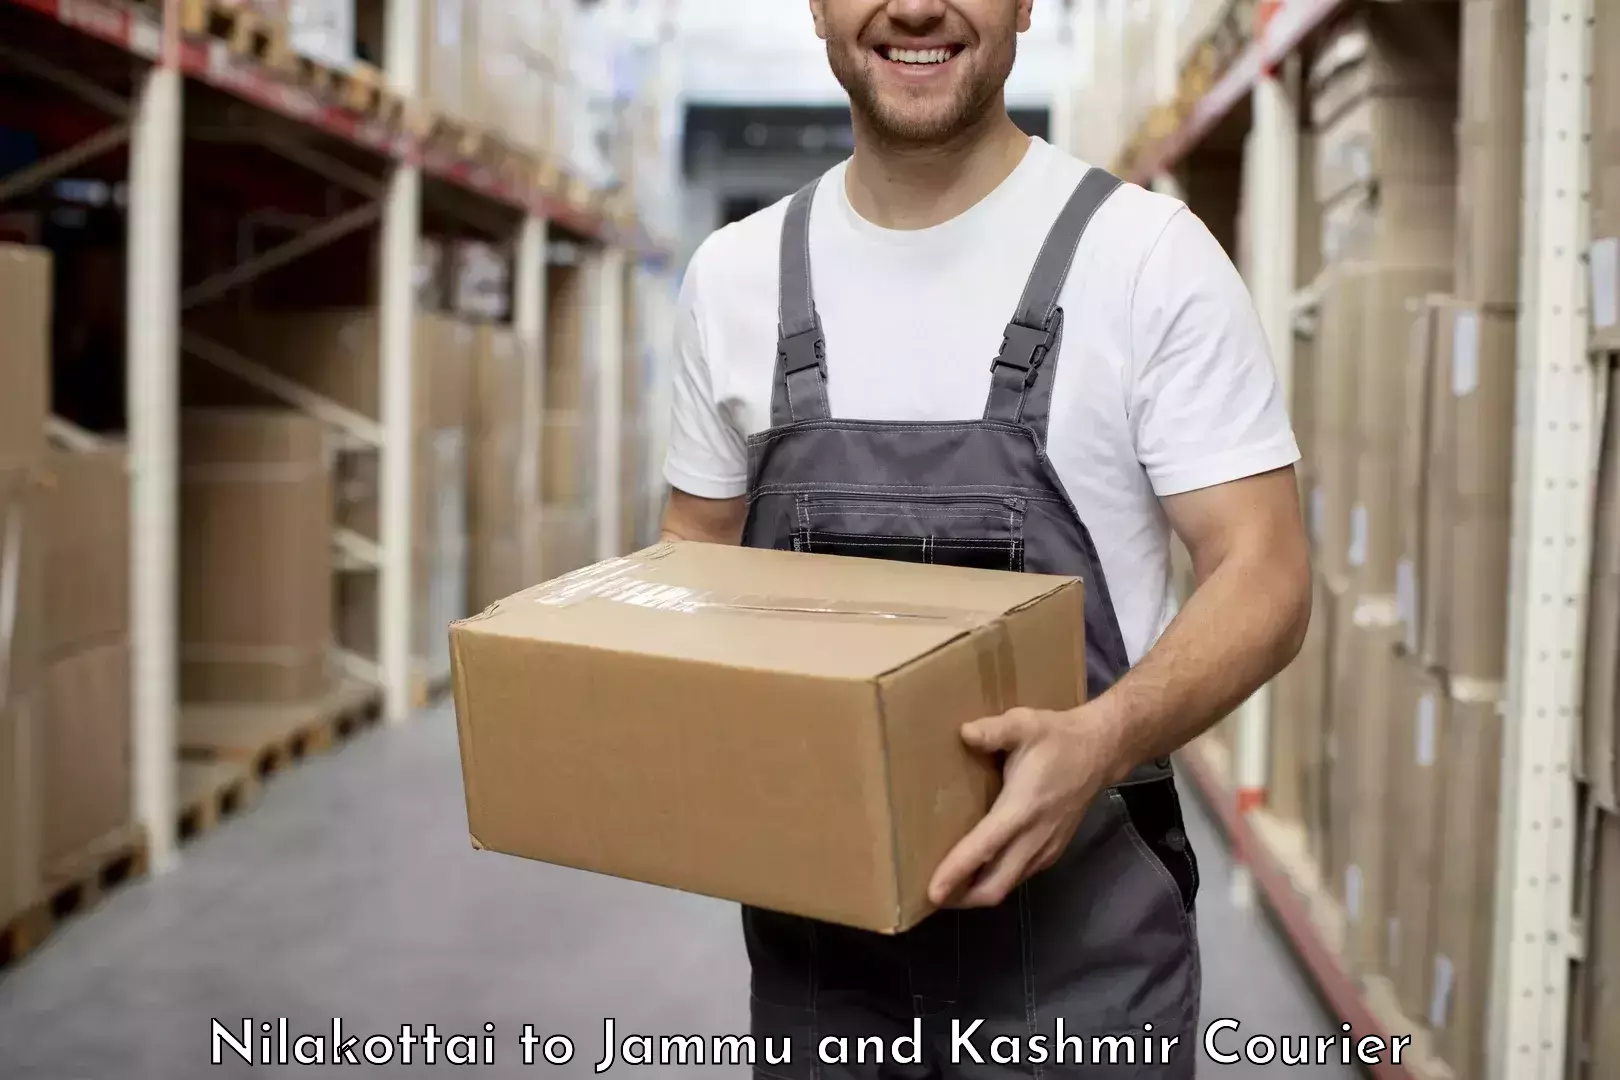 Residential courier service in Nilakottai to Udhampur